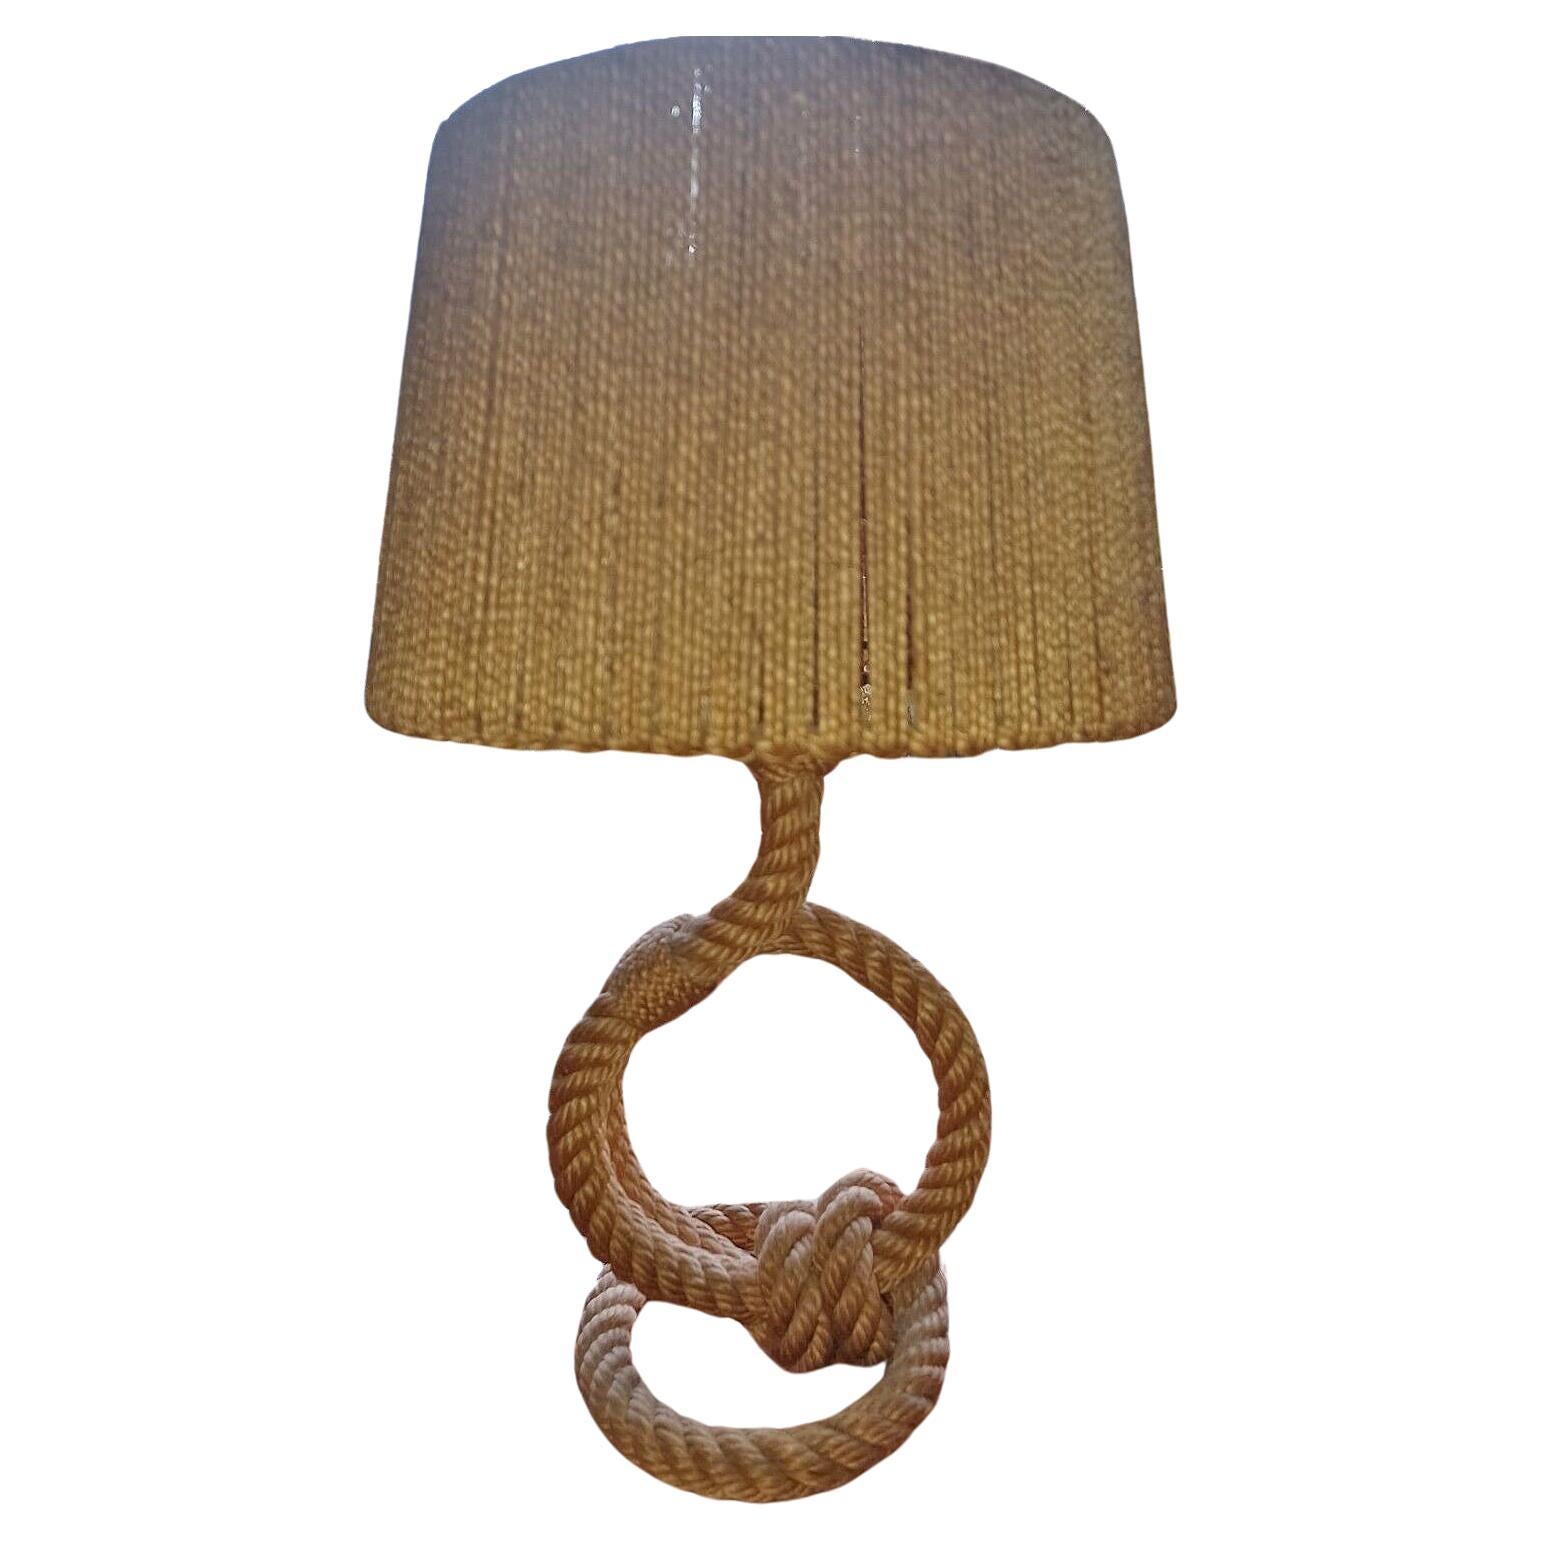 Audoux Minet Rope Table Lamp, 1950 by Adrien Audoux and Frida Minet For Sale